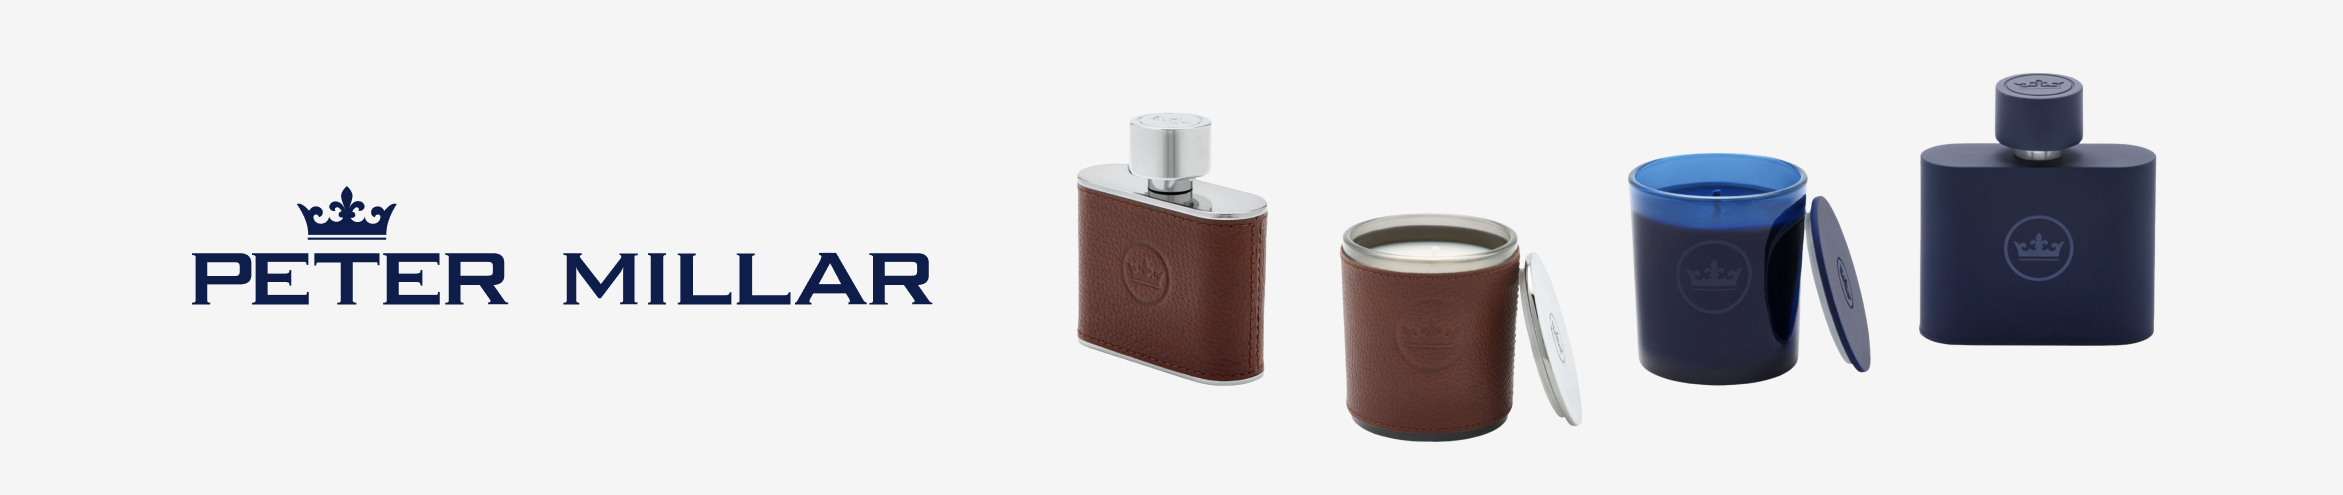 Peter Millar - Candles & Home Scents